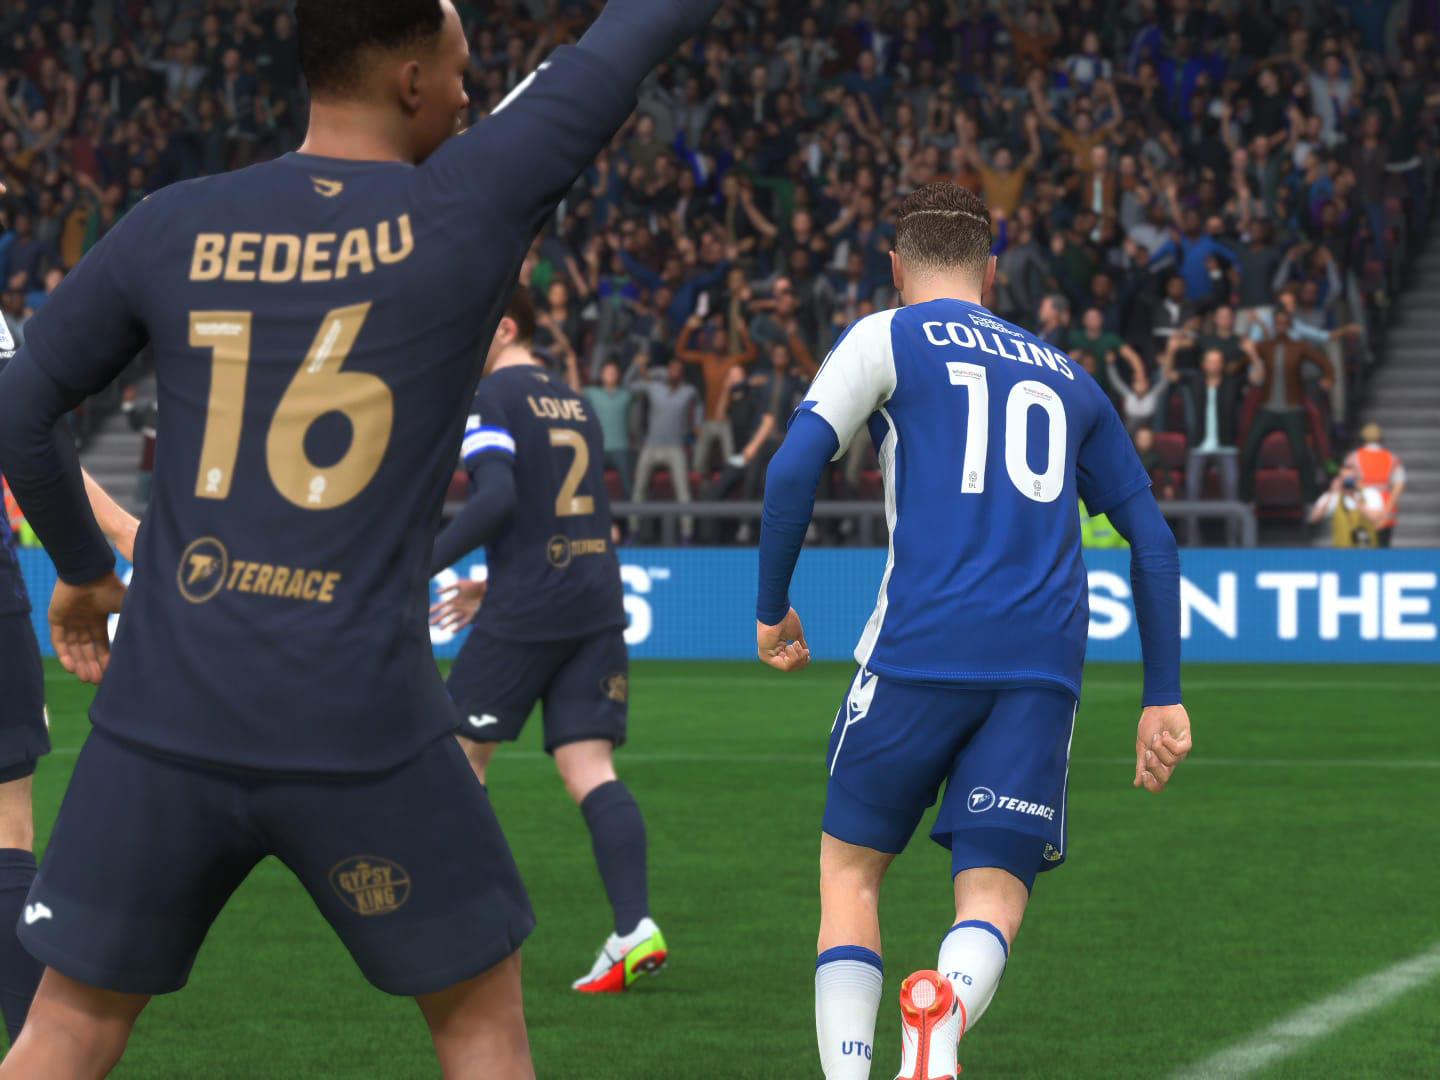 A screenshot from EA Sports FIFA showing The Terrace's kit sponsorship of Bristol Rovers and Morecambe.